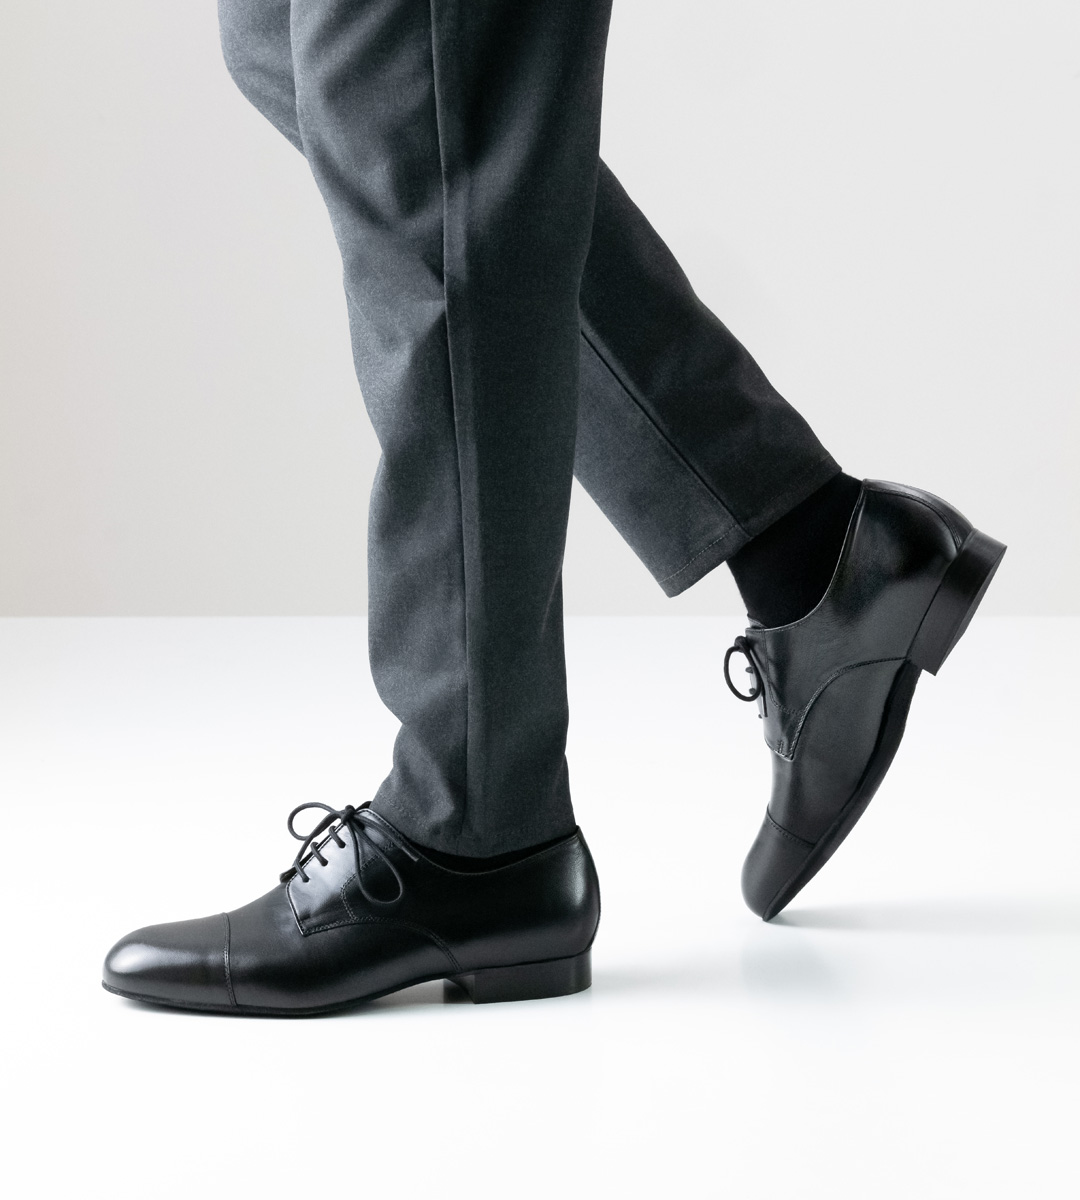 Men's dance shoe in black leather with 2 cm high heel in combination with grey trousers